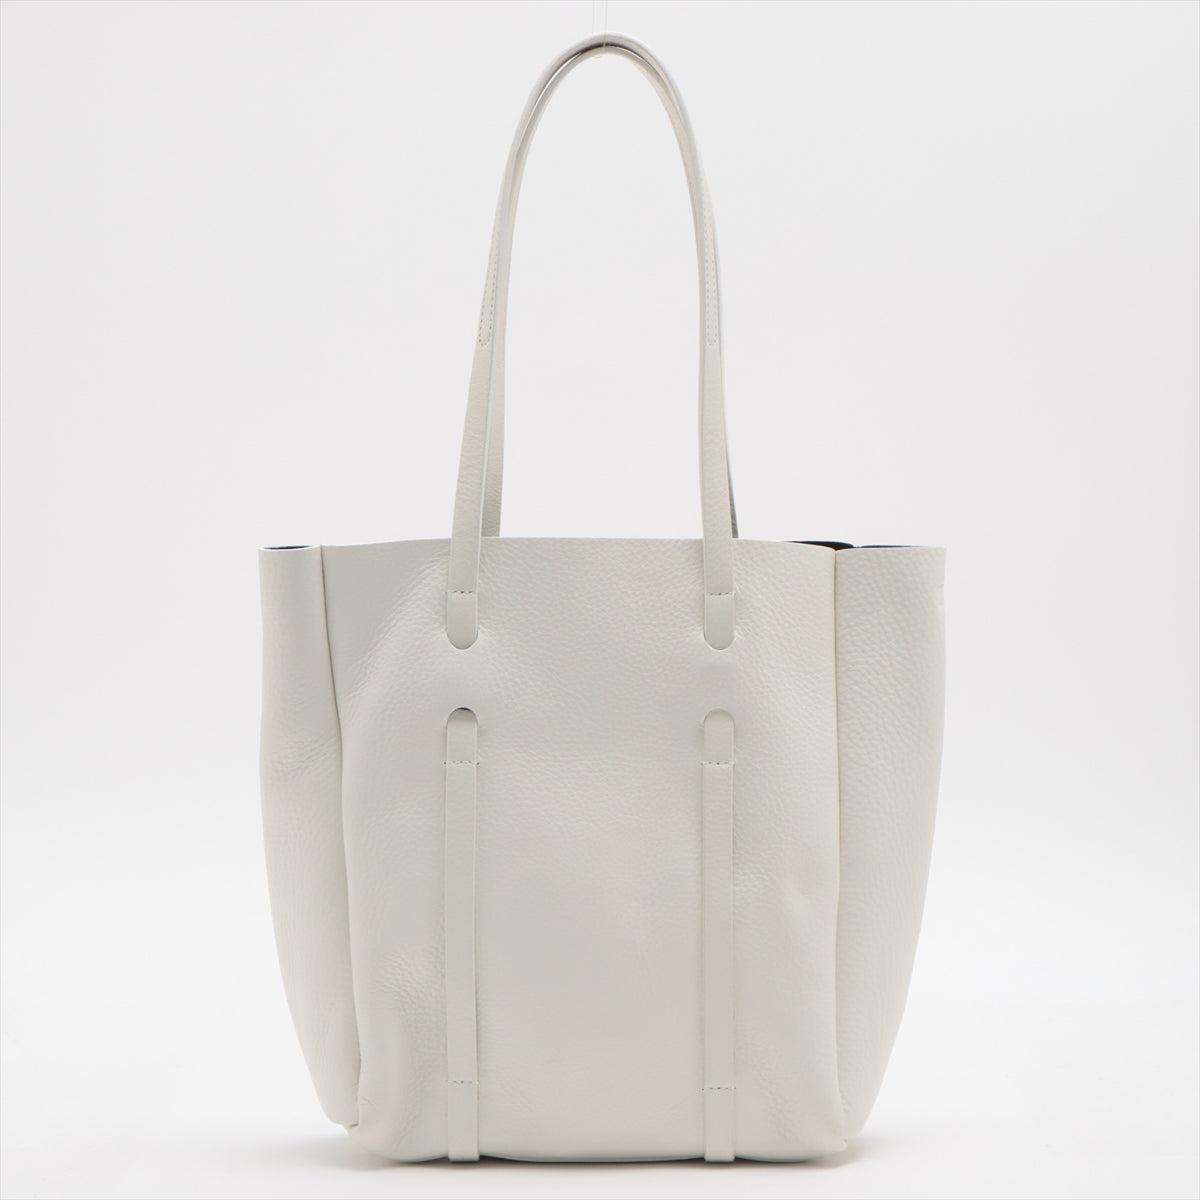 Balenciaga Everyday Tote XS Leather 2 way tote bag White 489813 With mirror